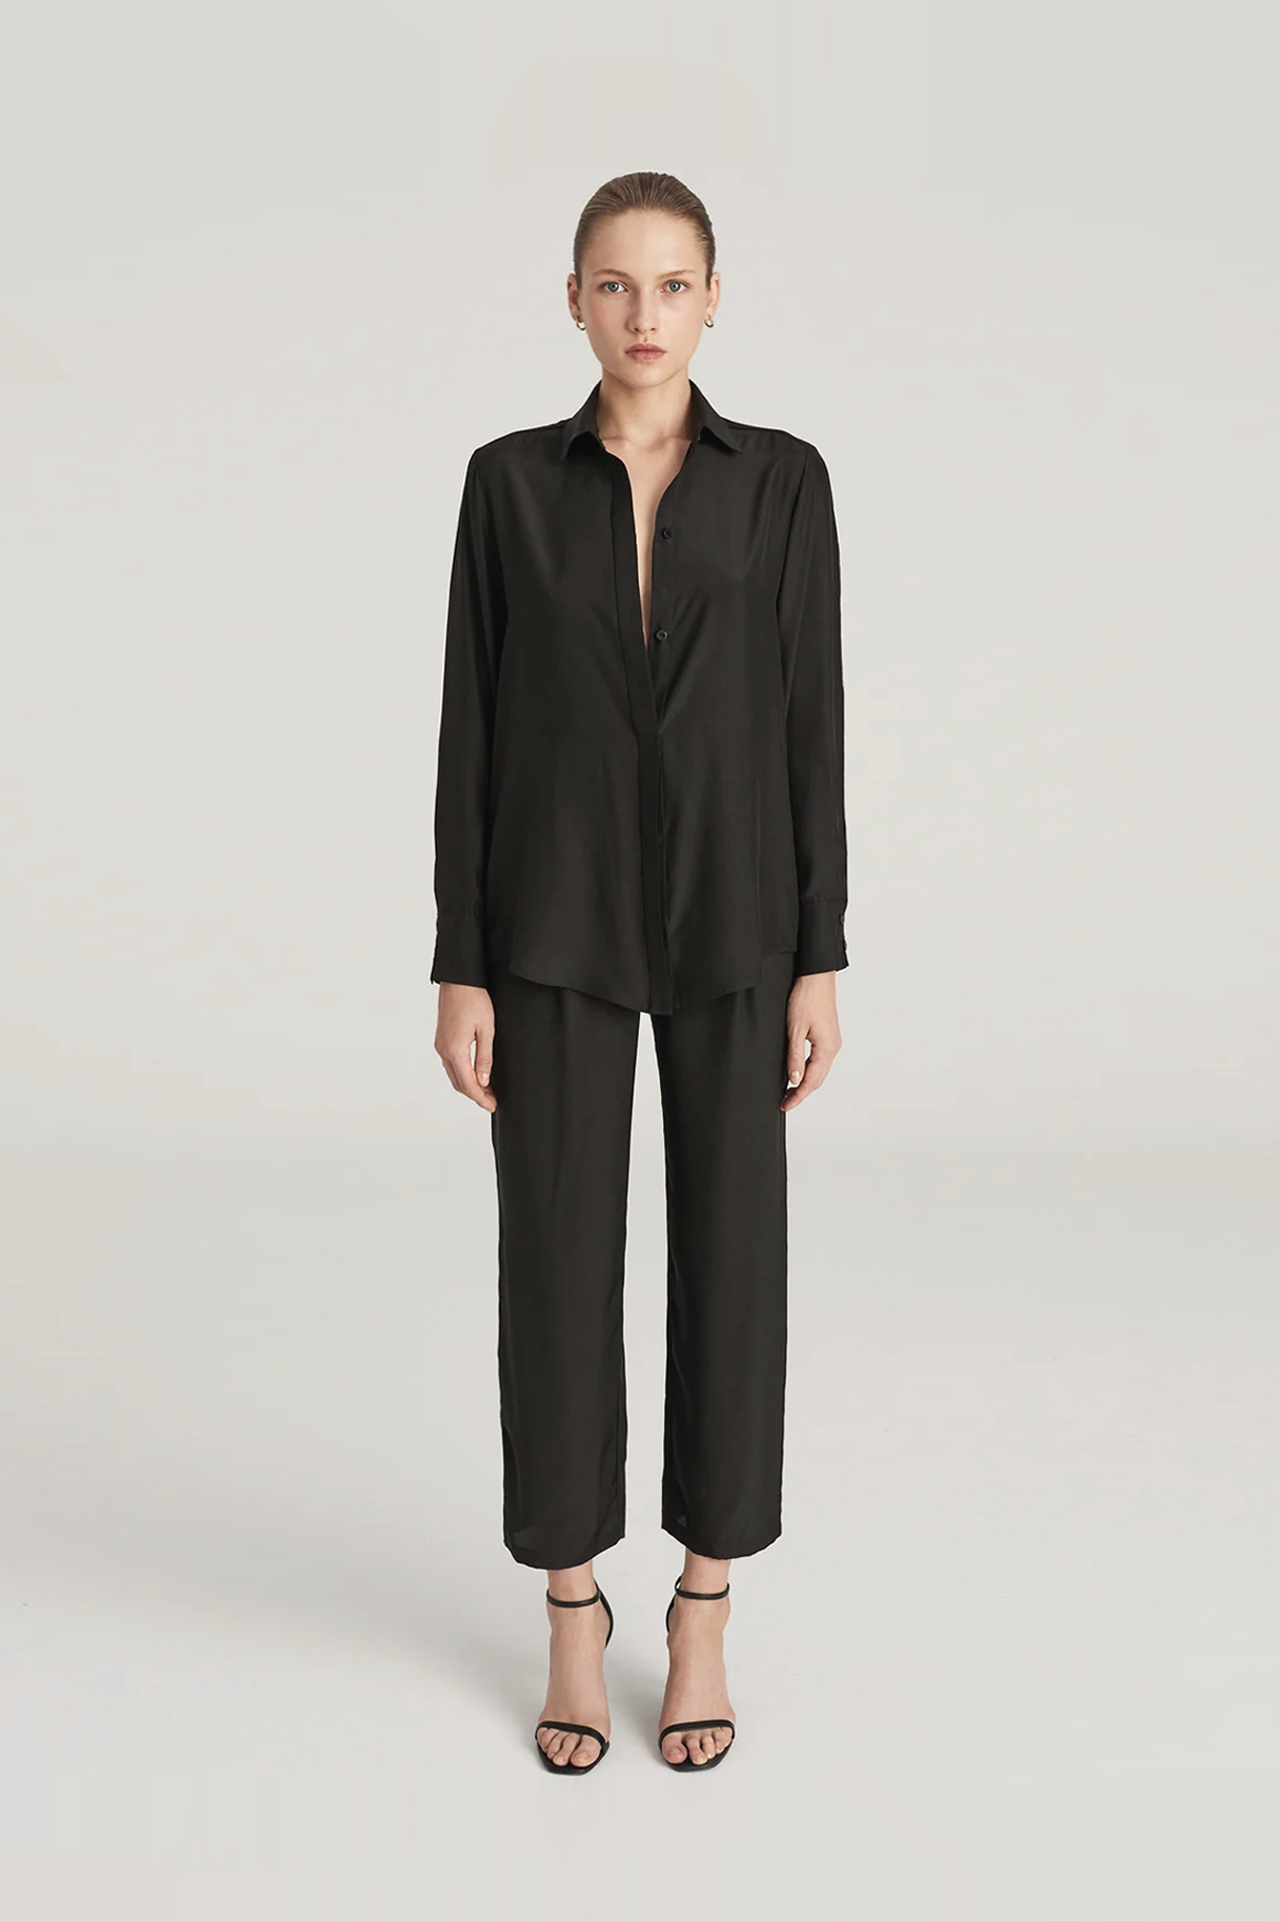 Black silk satin shirt and black suit trousers